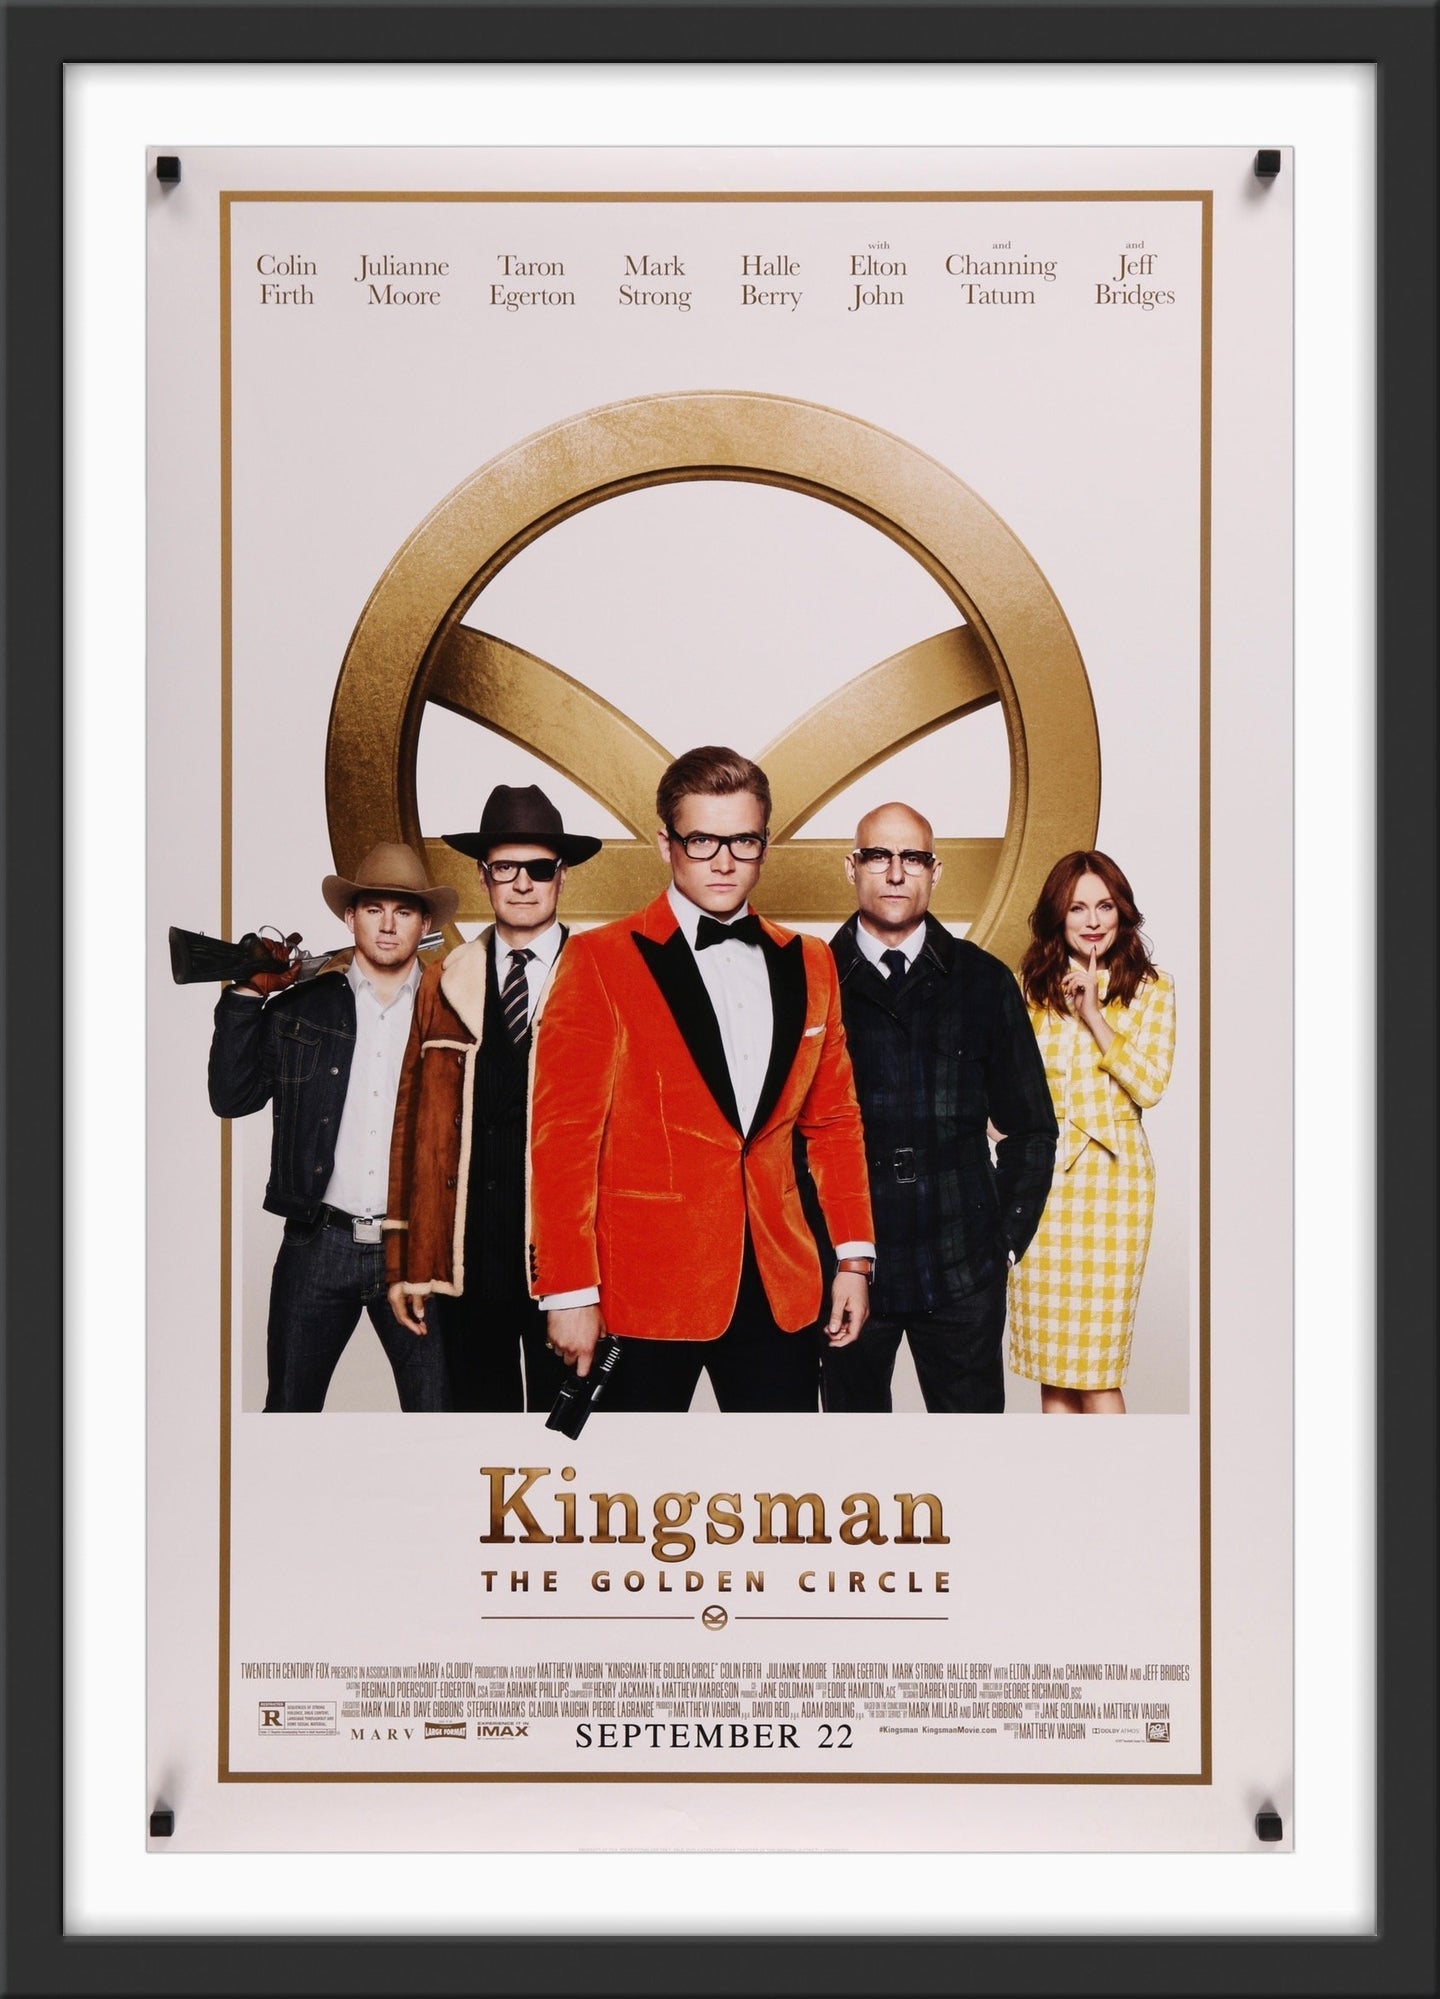 An original movie poster for the film Kingsman The Golden Circle